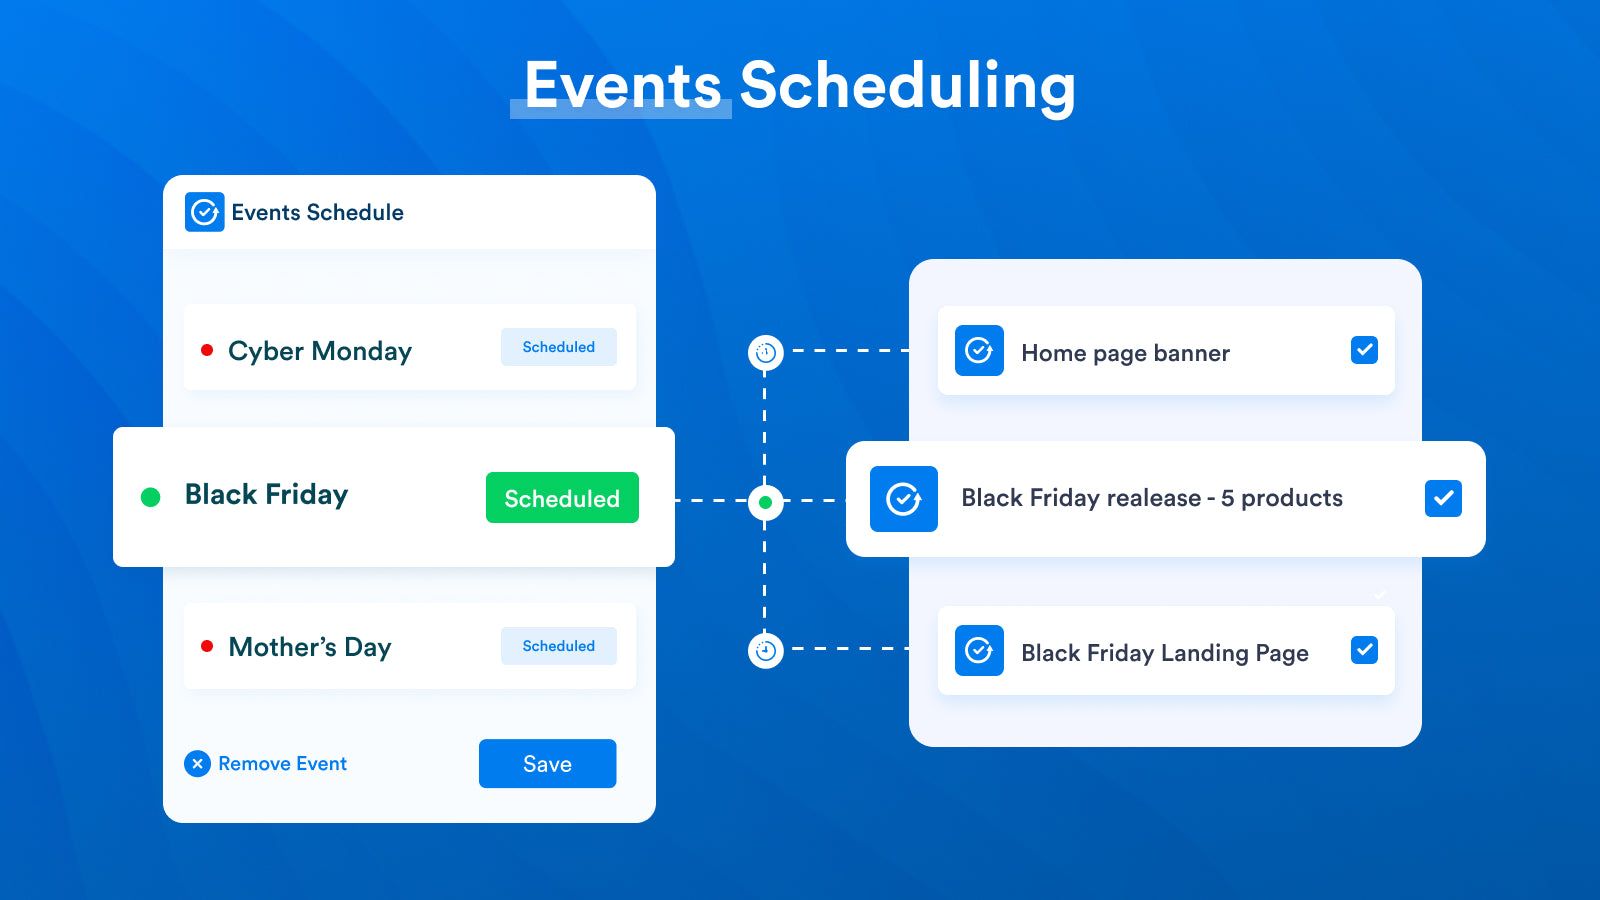 Schedule multiple events and multiple updates within each event!